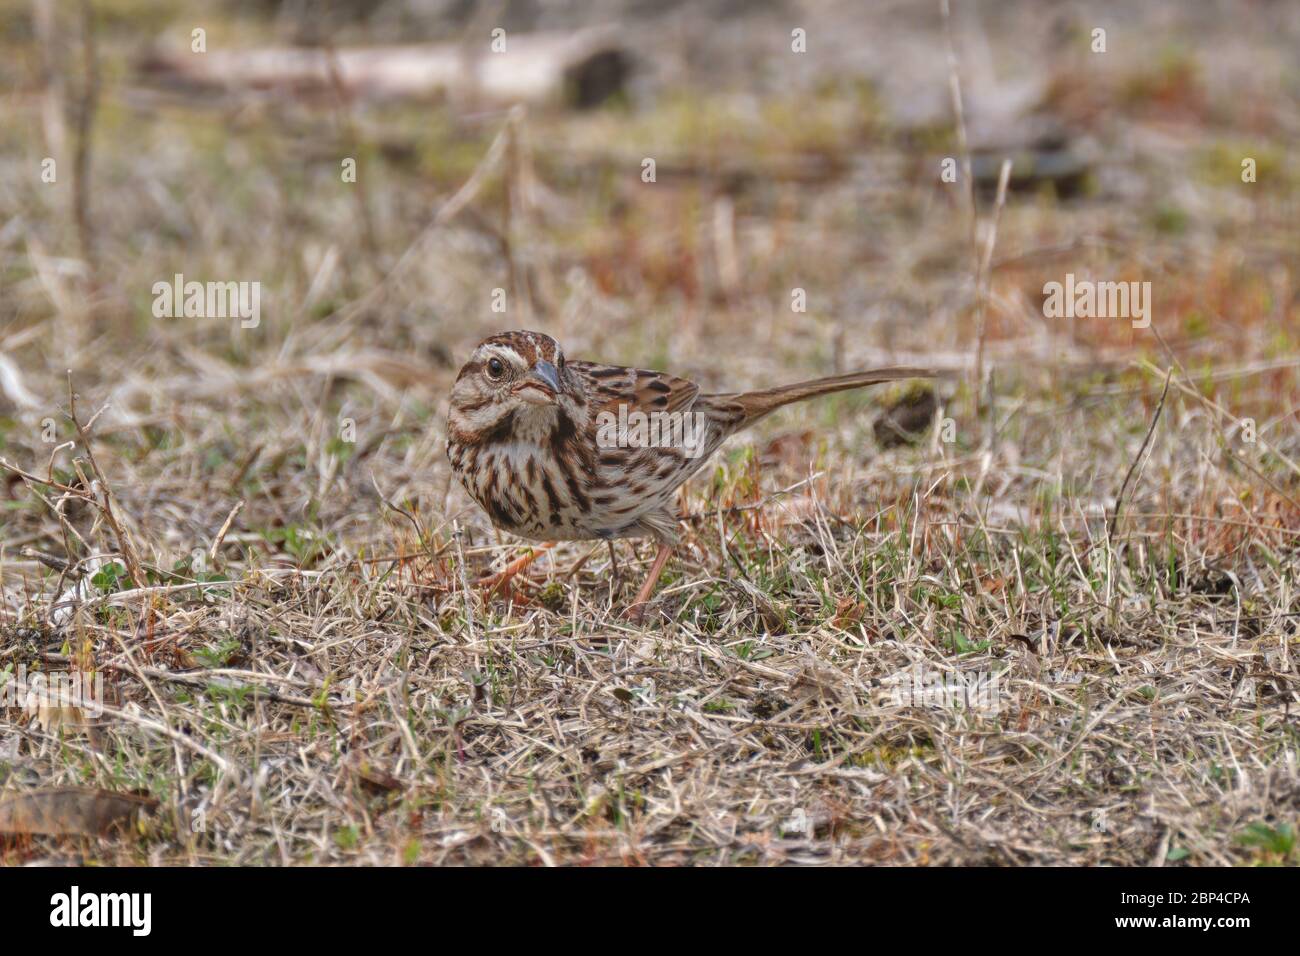 Song sparrow, Melospiza melodia, forages on the ground looking for food. Stock Photo